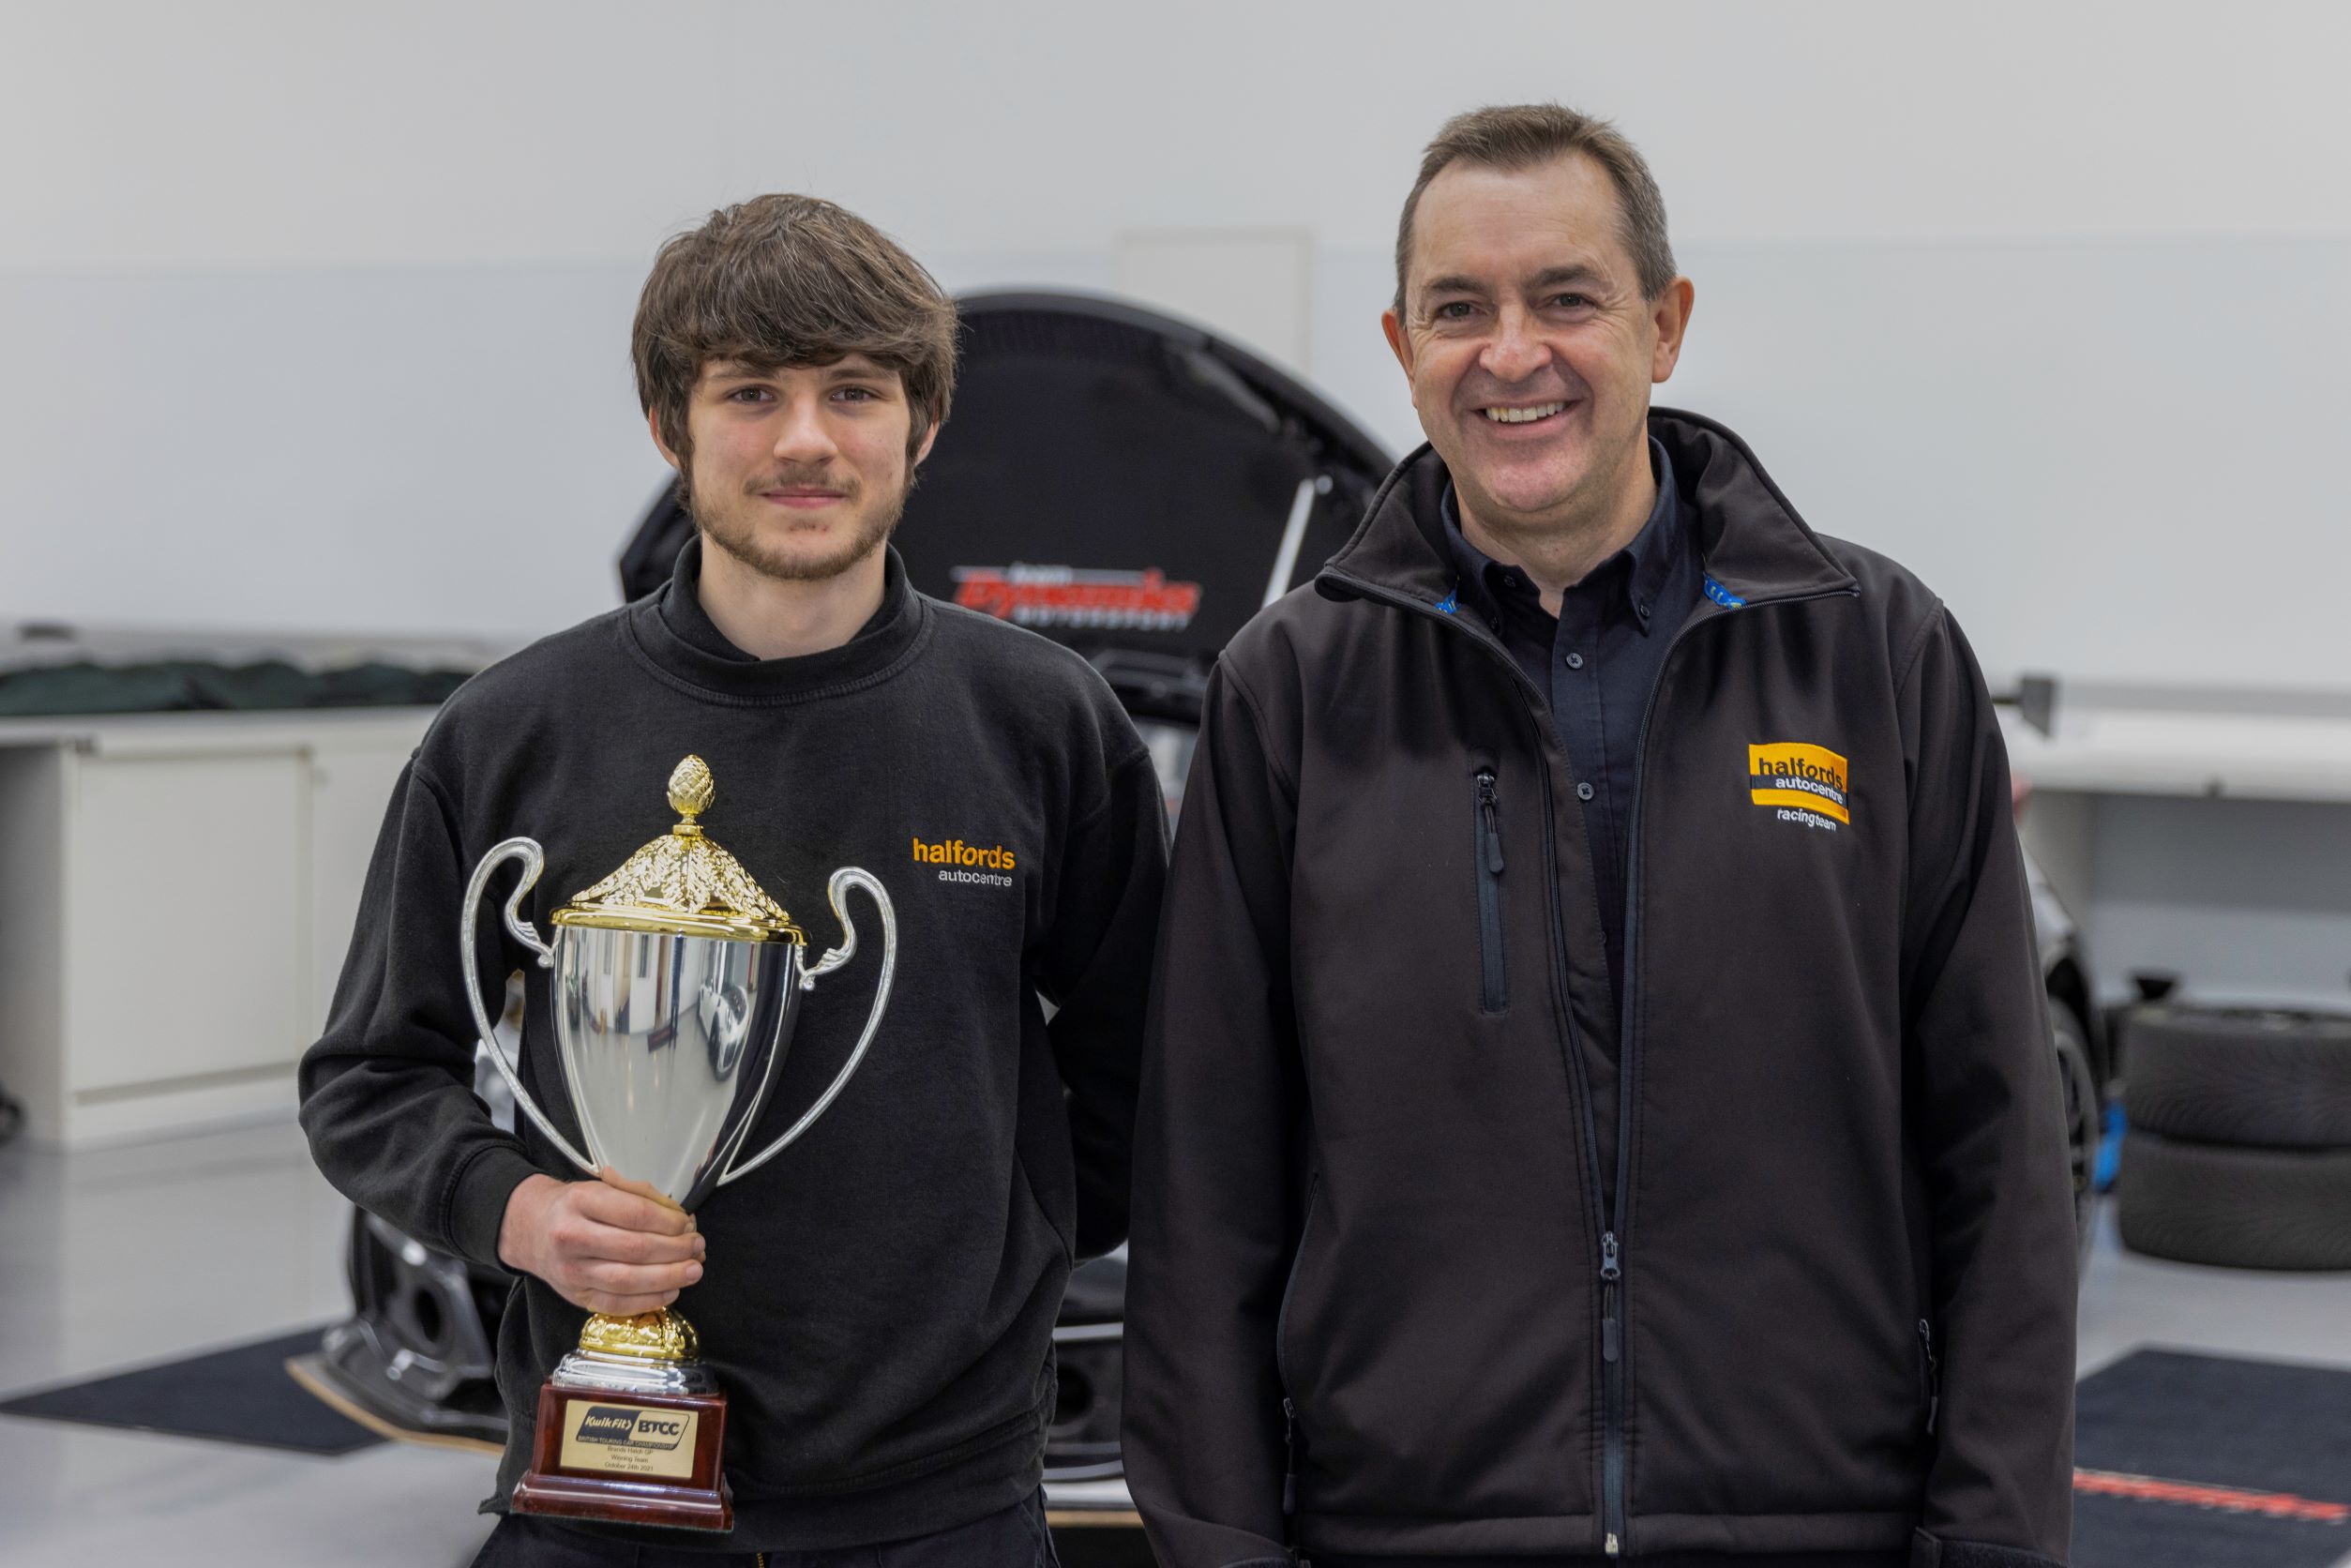 Halfords Apprentice of the Year Cameron Palmer holding his trophy stood next to Andy Randall, Chief Operating Officer of Halfords.